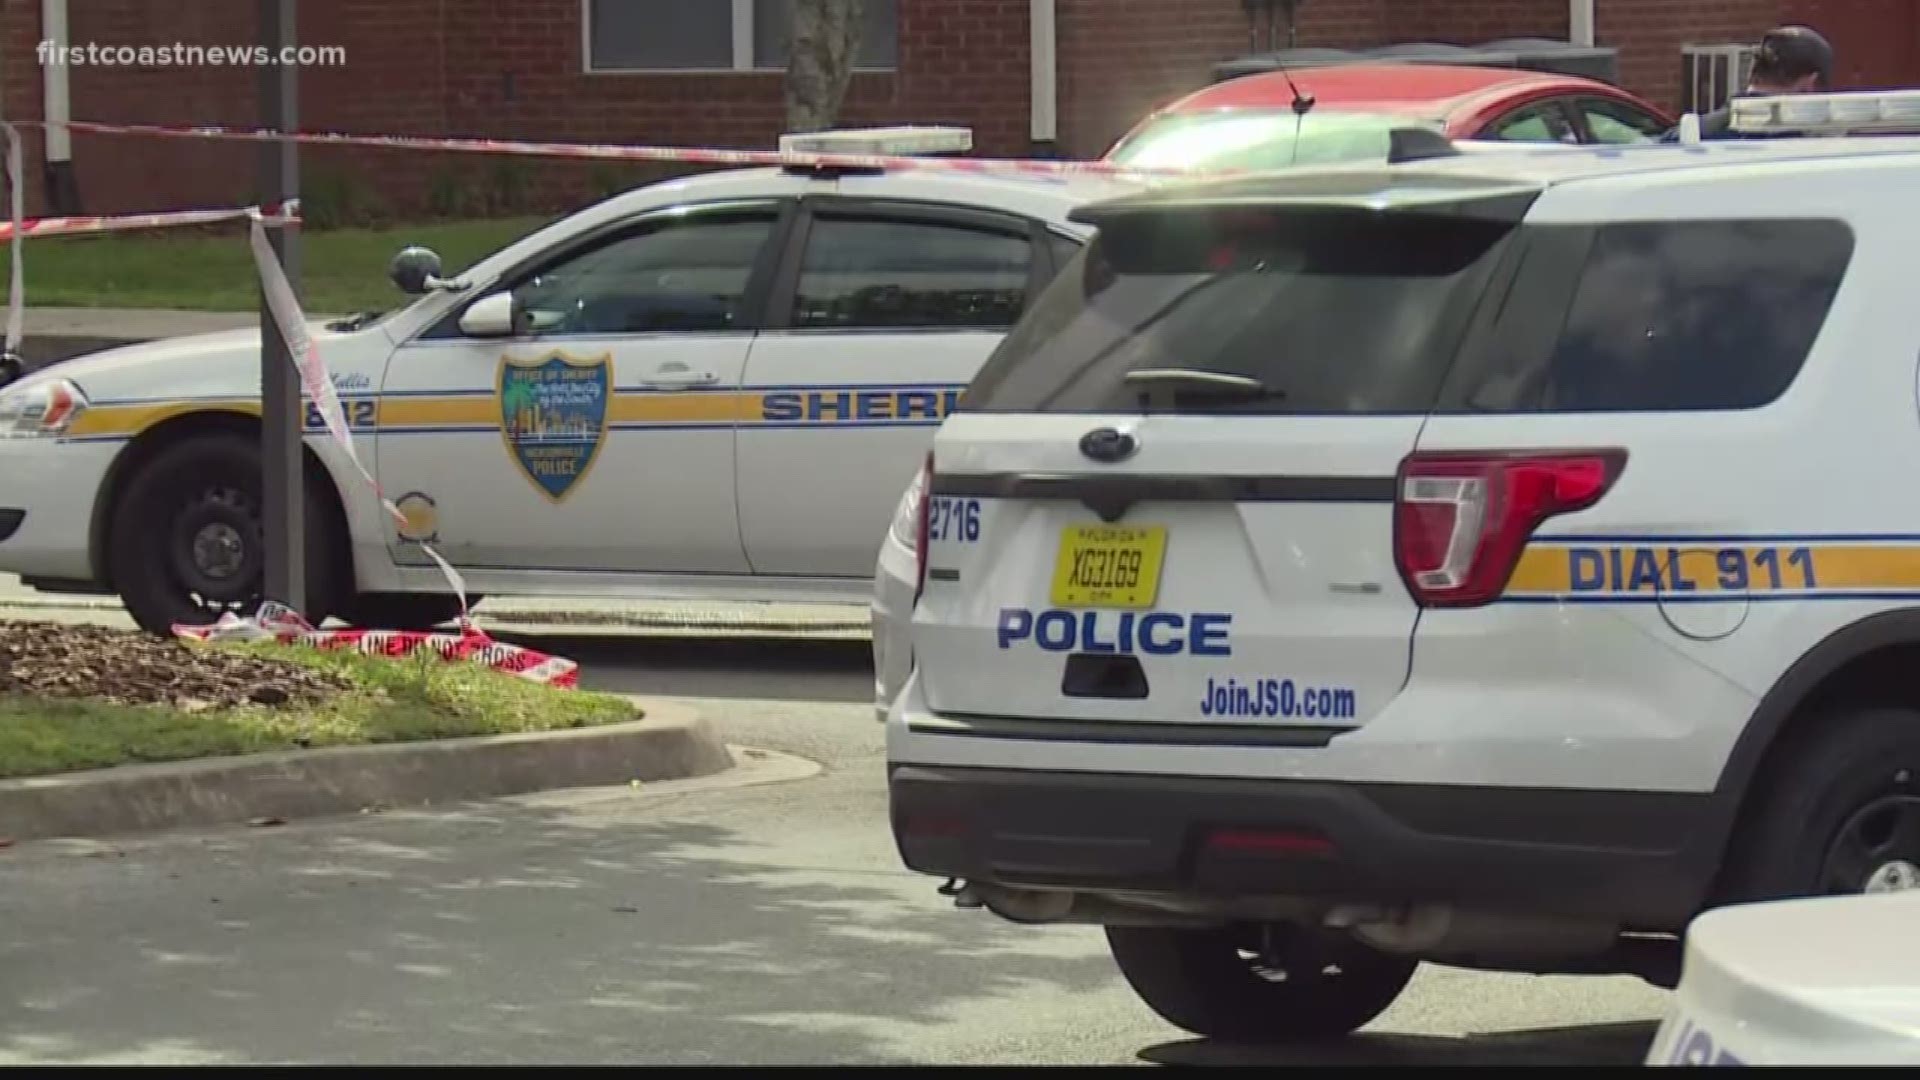 Two people were shot during an armed robbery at an apartment complex on the Westside Sunday afternoon, according to the Jacksonville Sheriff's Office.